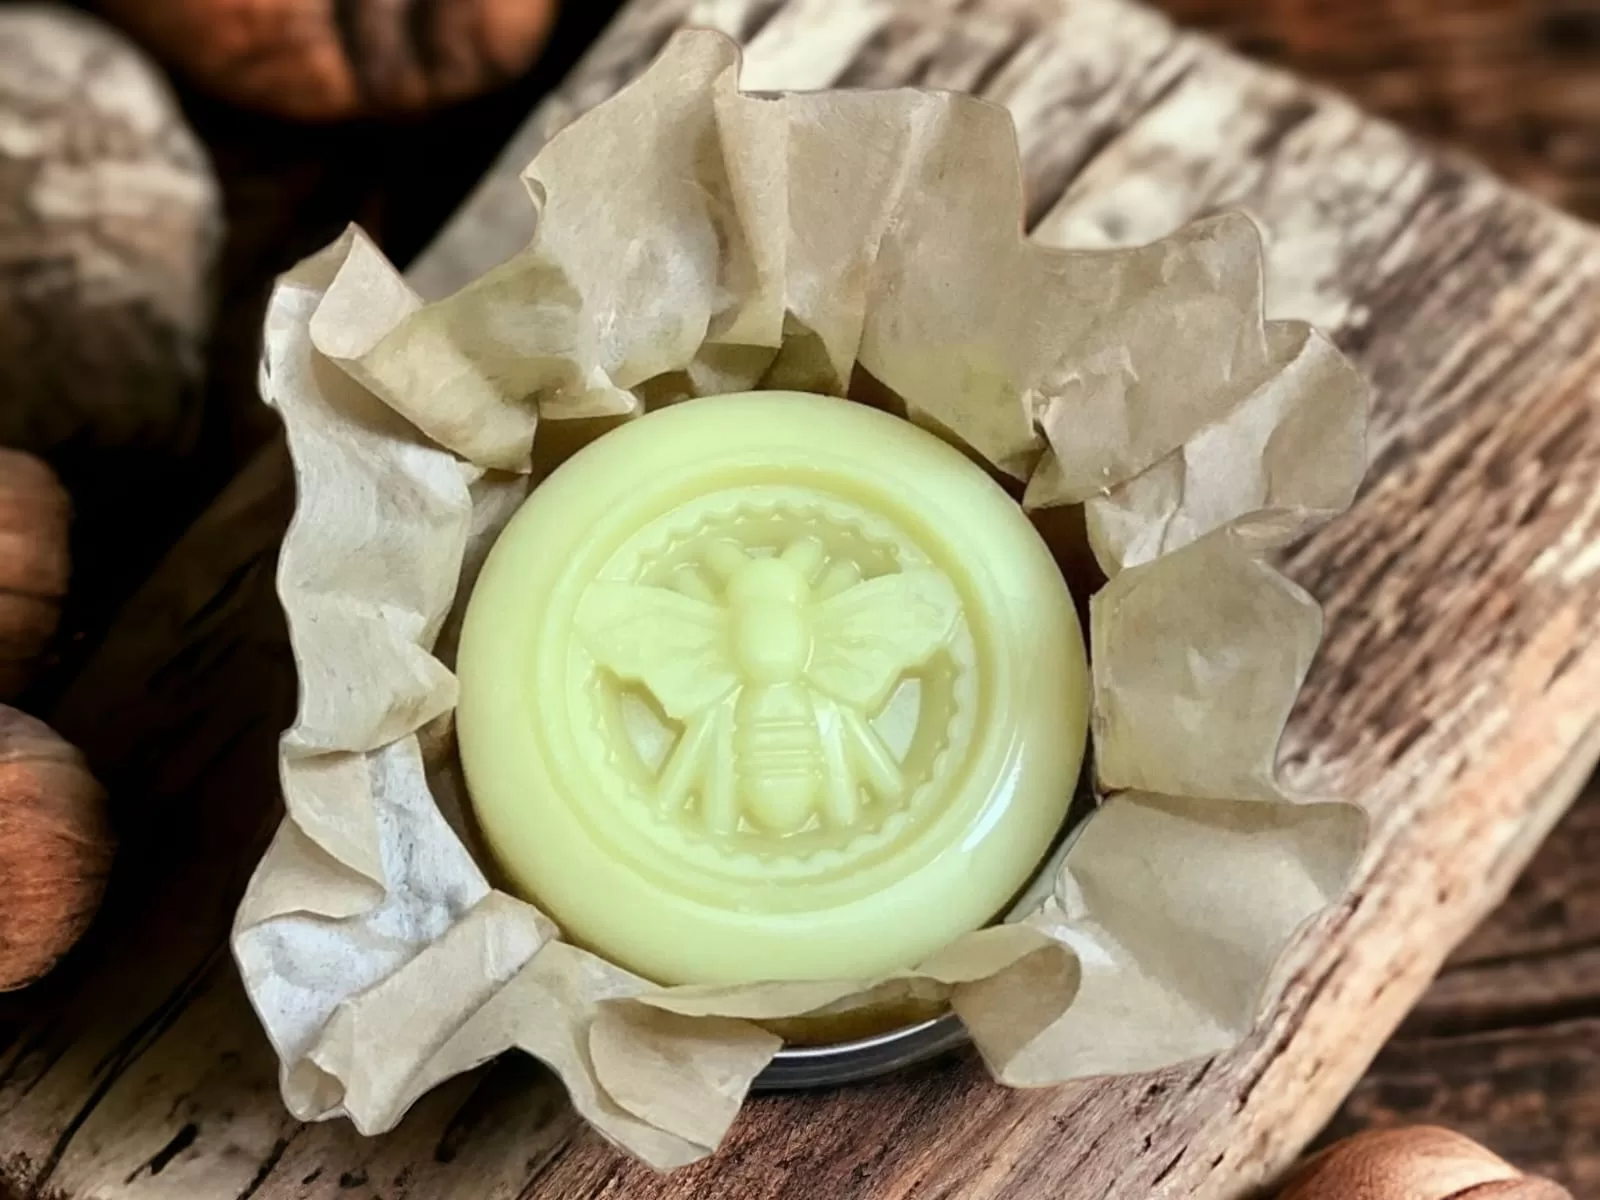 Kaantam’s Body Lotion Bar: For a Healthy and glowing complexion